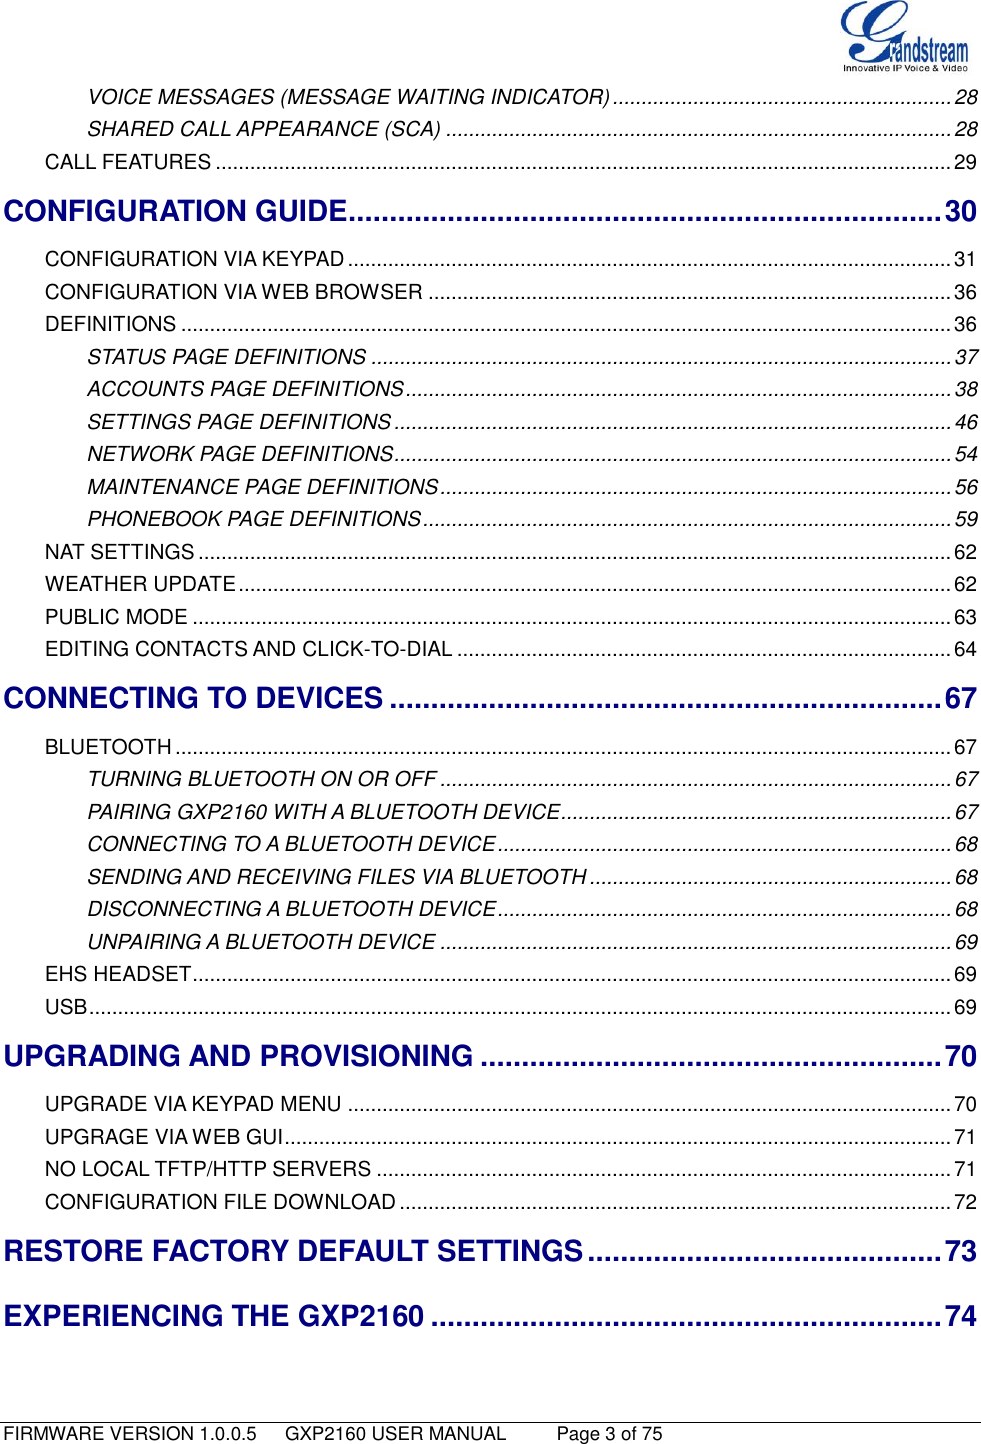   FIRMWARE VERSION 1.0.0.5   GXP2160 USER MANUAL     Page 3 of 75                                   VOICE MESSAGES (MESSAGE WAITING INDICATOR) ........................................................... 28 SHARED CALL APPEARANCE (SCA) ........................................................................................ 28 CALL FEATURES ................................................................................................................................ 29 CONFIGURATION GUIDE ........................................................................ 30 CONFIGURATION VIA KEYPAD ......................................................................................................... 31 CONFIGURATION VIA WEB BROWSER ........................................................................................... 36 DEFINITIONS ...................................................................................................................................... 36 STATUS PAGE DEFINITIONS ..................................................................................................... 37 ACCOUNTS PAGE DEFINITIONS ............................................................................................... 38 SETTINGS PAGE DEFINITIONS ................................................................................................. 46 NETWORK PAGE DEFINITIONS ................................................................................................. 54 MAINTENANCE PAGE DEFINITIONS ......................................................................................... 56 PHONEBOOK PAGE DEFINITIONS ............................................................................................ 59 NAT SETTINGS ................................................................................................................................... 62 WEATHER UPDATE ............................................................................................................................ 62 PUBLIC MODE .................................................................................................................................... 63 EDITING CONTACTS AND CLICK-TO-DIAL ...................................................................................... 64 CONNECTING TO DEVICES ................................................................... 67 BLUETOOTH ....................................................................................................................................... 67 TURNING BLUETOOTH ON OR OFF ......................................................................................... 67 PAIRING GXP2160 WITH A BLUETOOTH DEVICE .................................................................... 67 CONNECTING TO A BLUETOOTH DEVICE ............................................................................... 68 SENDING AND RECEIVING FILES VIA BLUETOOTH ............................................................... 68 DISCONNECTING A BLUETOOTH DEVICE ............................................................................... 68 UNPAIRING A BLUETOOTH DEVICE ......................................................................................... 69 EHS HEADSET .................................................................................................................................... 69 USB ...................................................................................................................................................... 69 UPGRADING AND PROVISIONING ........................................................ 70 UPGRADE VIA KEYPAD MENU ......................................................................................................... 70 UPGRAGE VIA WEB GUI .................................................................................................................... 71 NO LOCAL TFTP/HTTP SERVERS .................................................................................................... 71 CONFIGURATION FILE DOWNLOAD ................................................................................................ 72 RESTORE FACTORY DEFAULT SETTINGS ........................................... 73 EXPERIENCING THE GXP2160 .............................................................. 74  